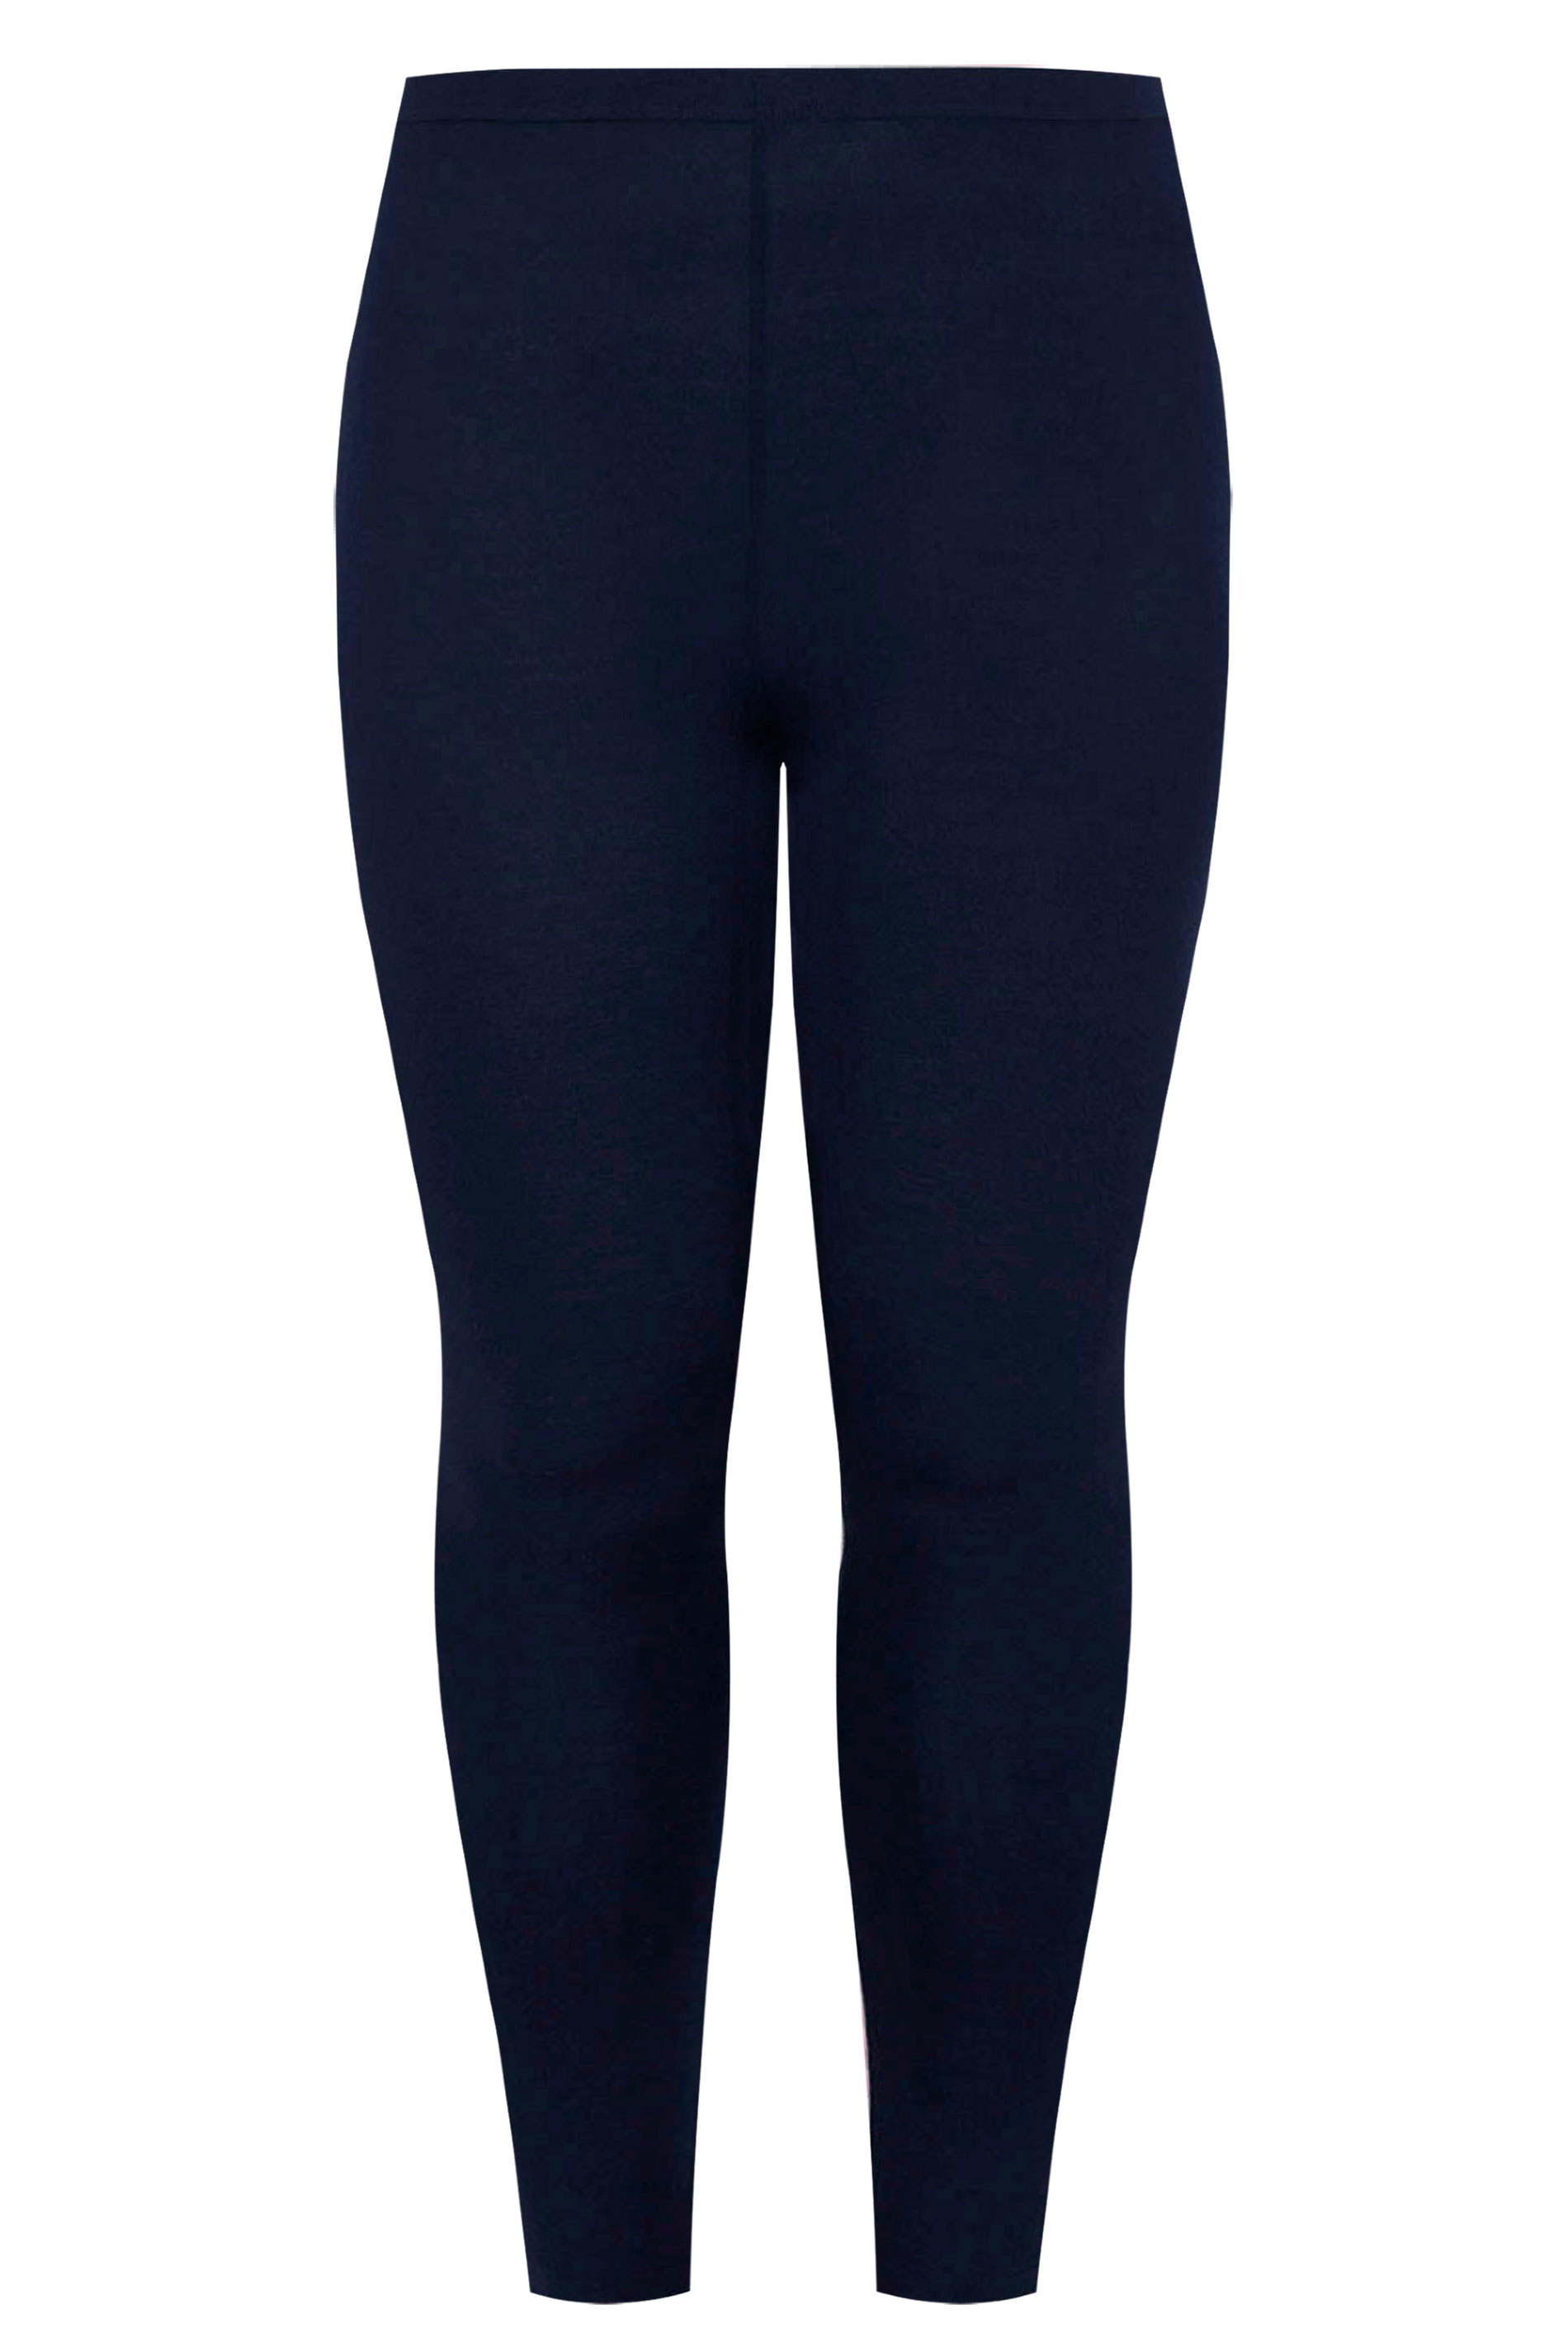 Old Navy Cotton Leggings Blue Size M - $16 (54% Off Retail) - From Sam